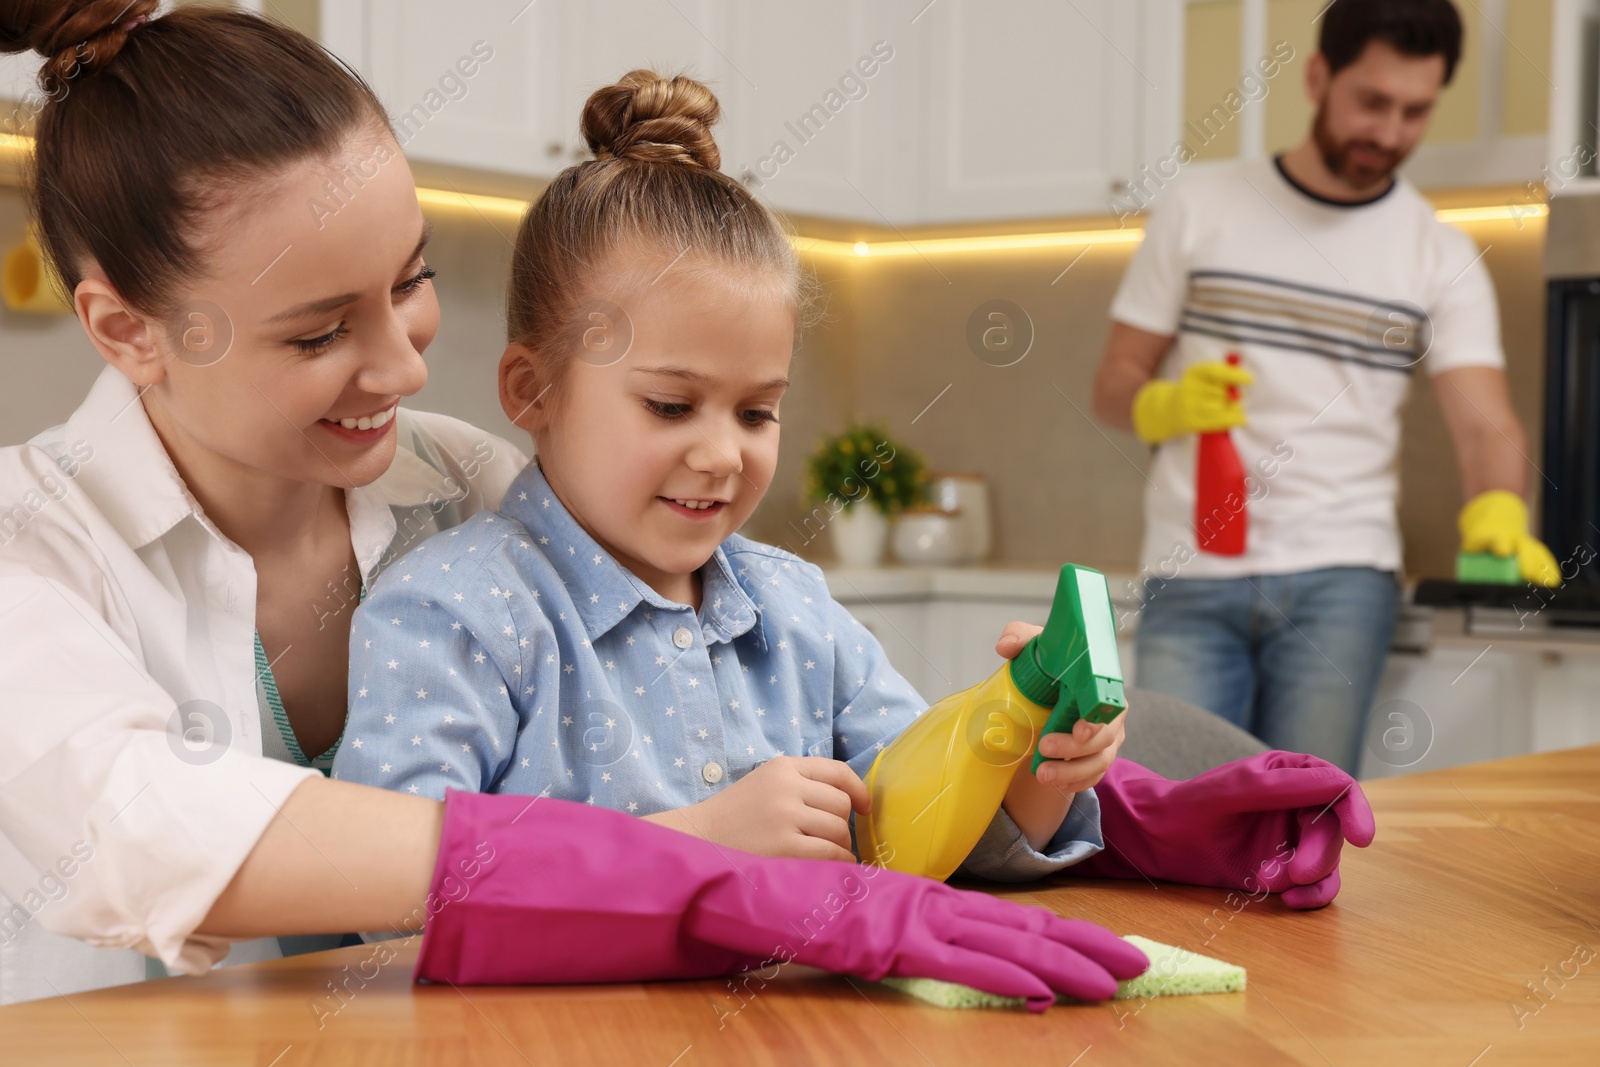 Photo of Spring cleaning. Happy family tidying up kitchen together